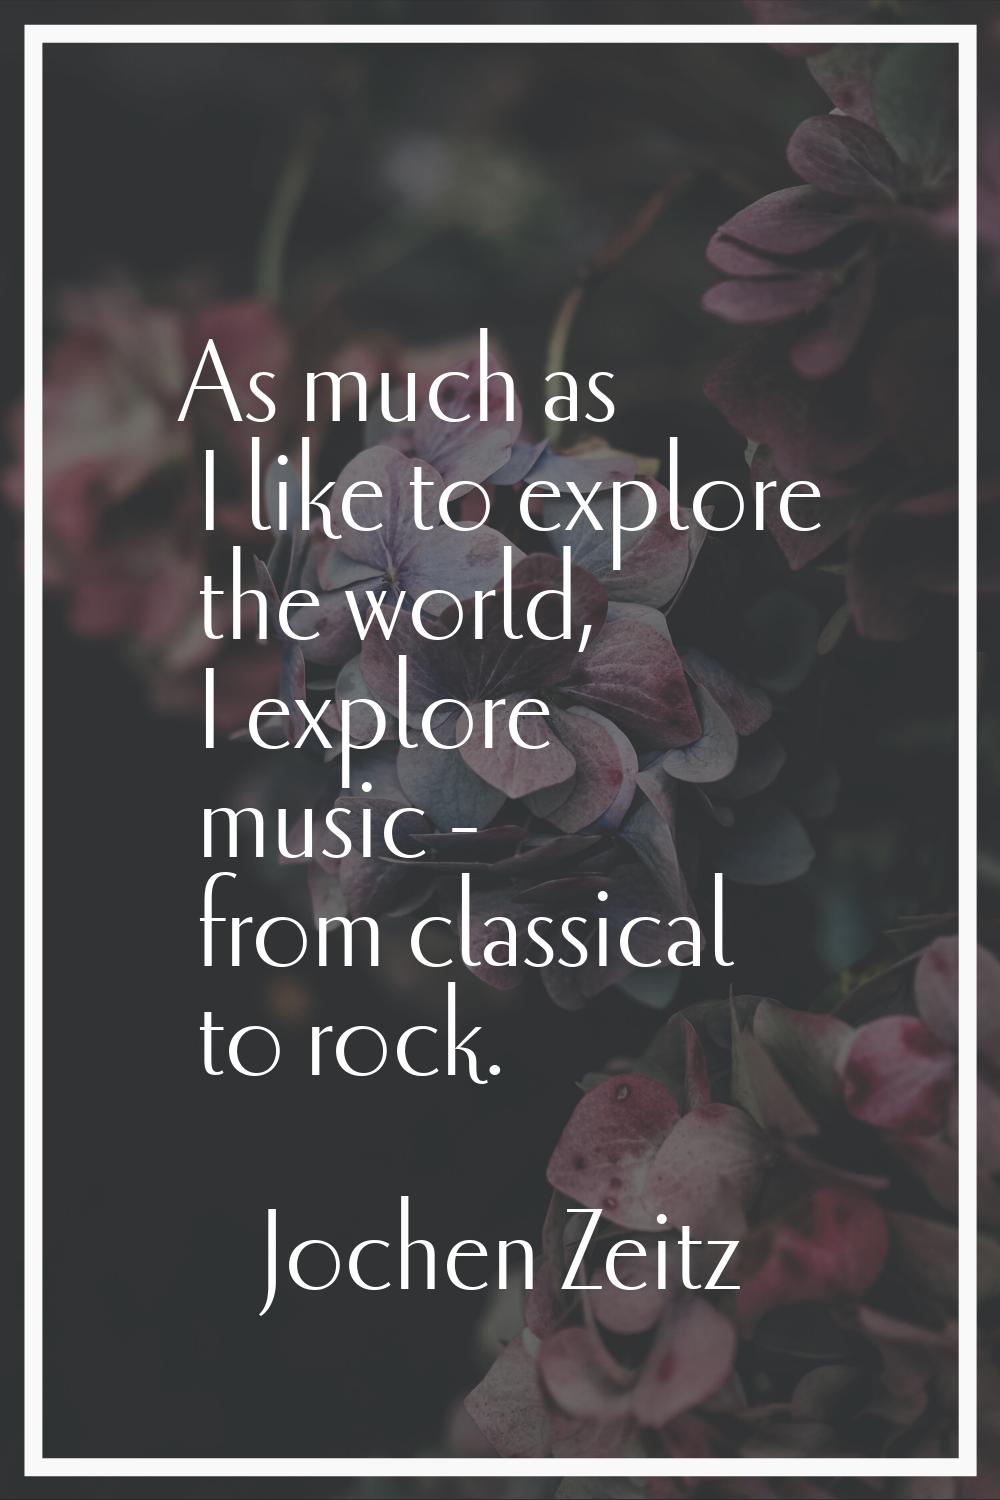 As much as I like to explore the world, I explore music - from classical to rock.